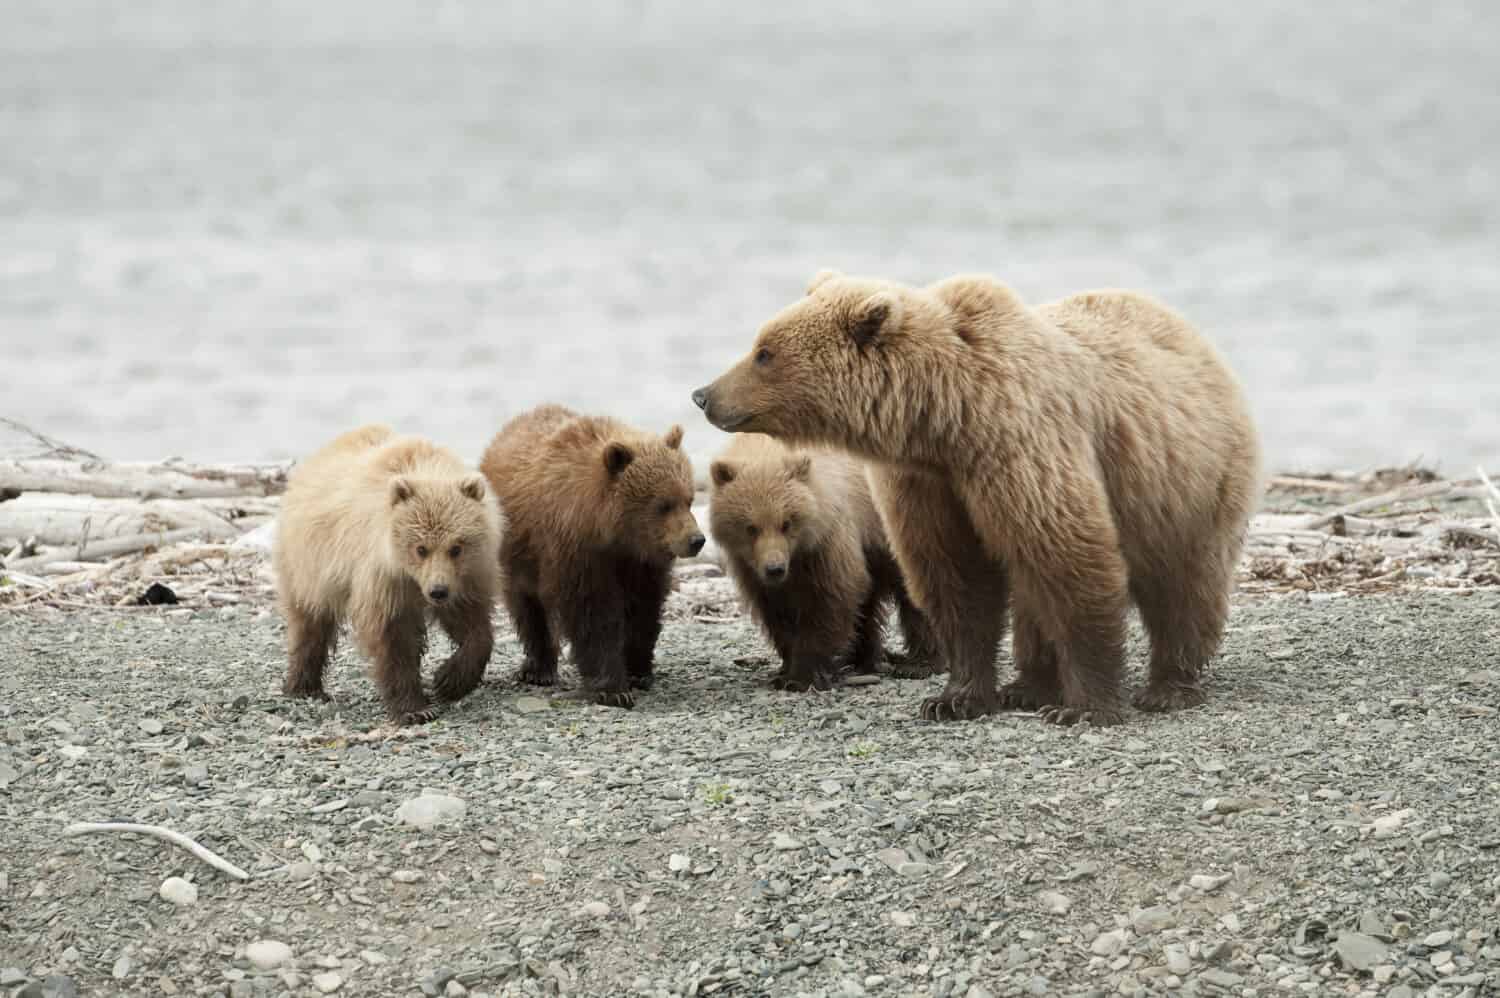 A mother brown bear with her three cubs.